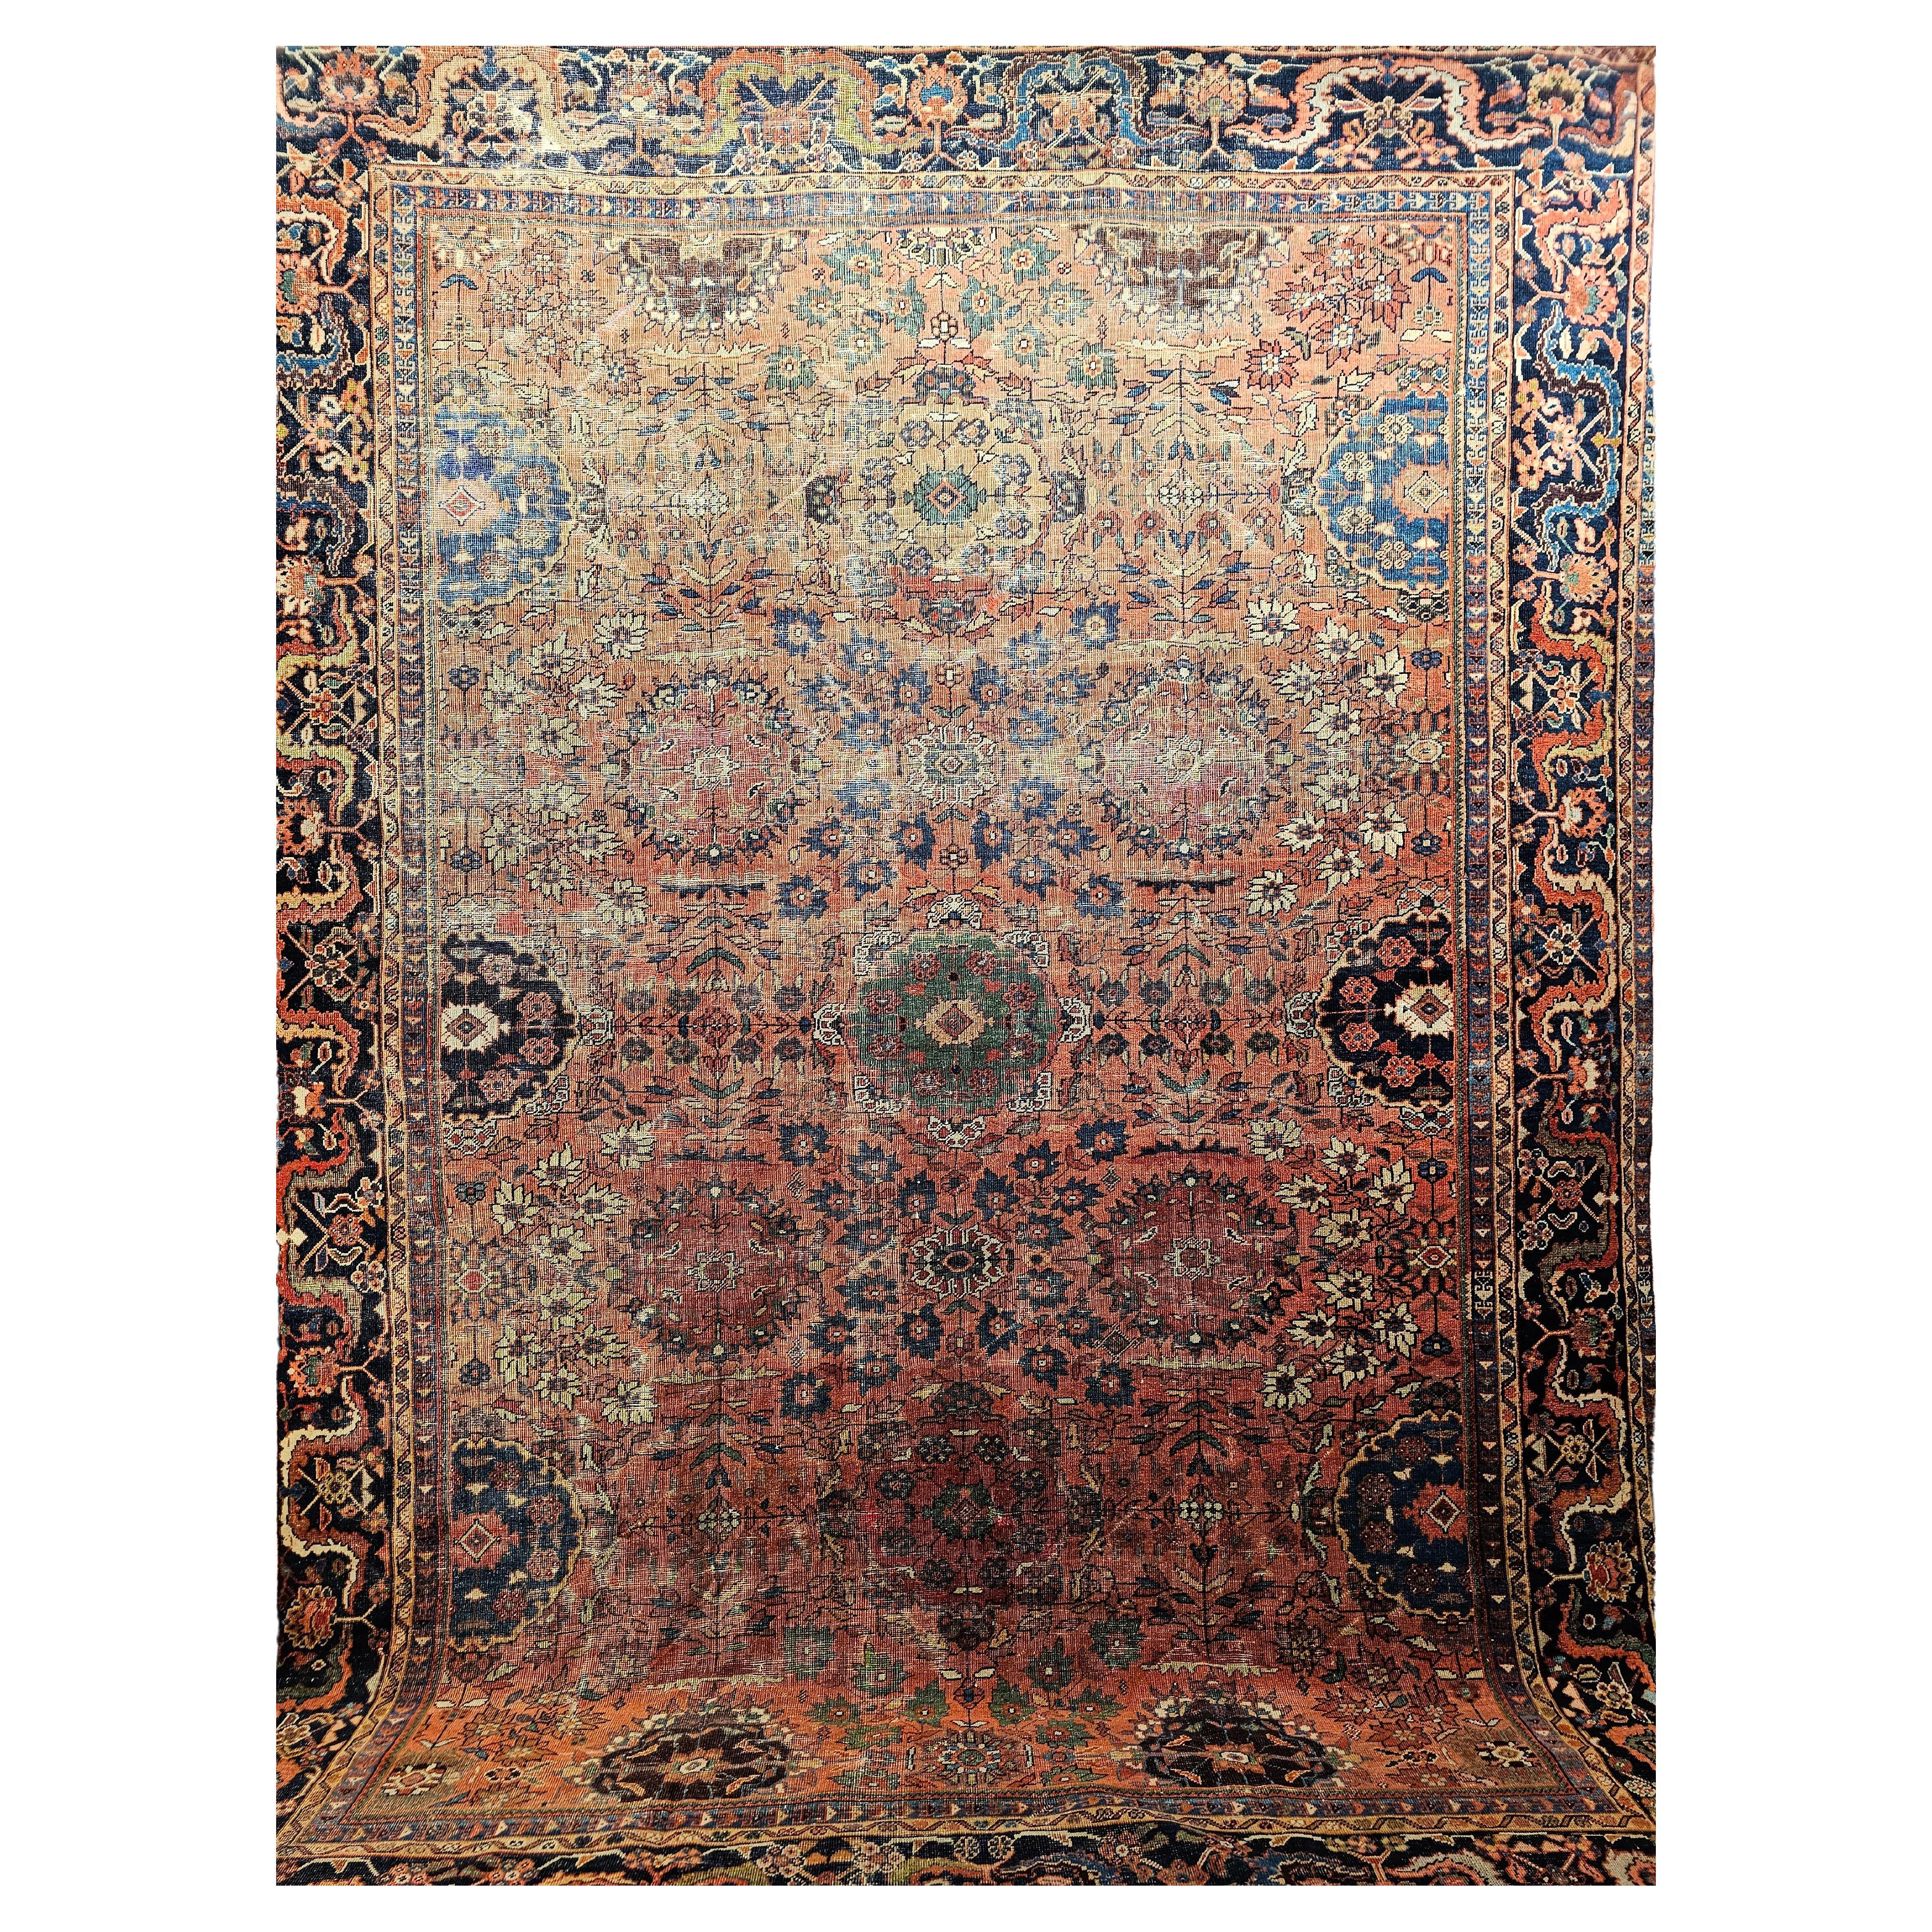 Vintage Persian Mahal Sultanabad Room Size Rug in Brick Red, Navy Blue